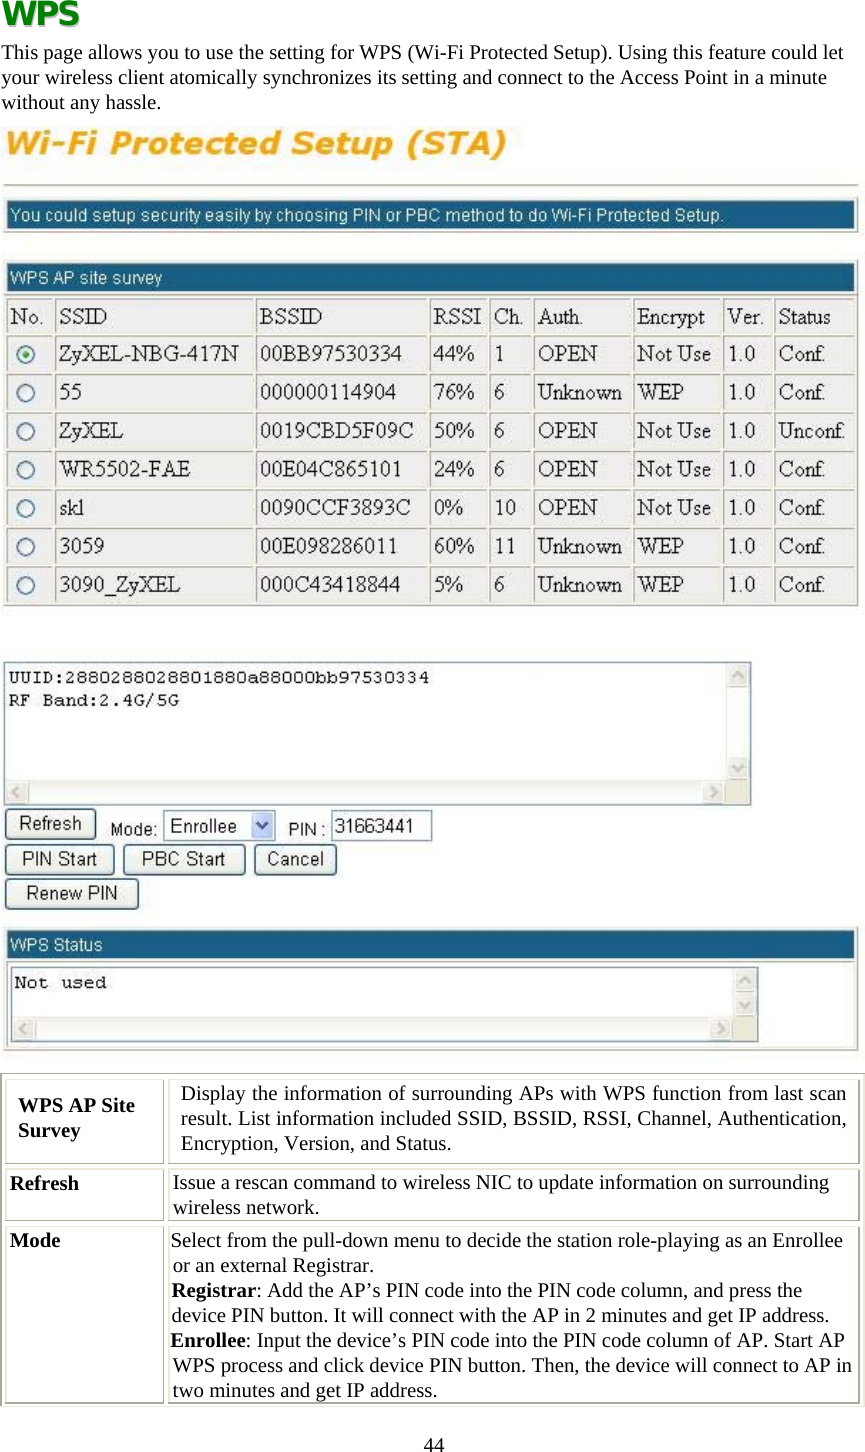   44 WWPPSS  This page allows you to use the setting for WPS (Wi-Fi Protected Setup). Using this feature could let your wireless client atomically synchronizes its setting and connect to the Access Point in a minute without any hassle.  WPS AP Site Survey Display the information of surrounding APs with WPS function from last scan result. List information included SSID, BSSID, RSSI, Channel, Authentication, Encryption, Version, and Status. Refresh  Issue a rescan command to wireless NIC to update information on surrounding wireless network. Mode  Select from the pull-down menu to decide the station role-playing as an Enrollee or an external Registrar. Registrar: Add the AP’s PIN code into the PIN code column, and press the device PIN button. It will connect with the AP in 2 minutes and get IP address.  Enrollee: Input the device’s PIN code into the PIN code column of AP. Start AP WPS process and click device PIN button. Then, the device will connect to AP in two minutes and get IP address. 